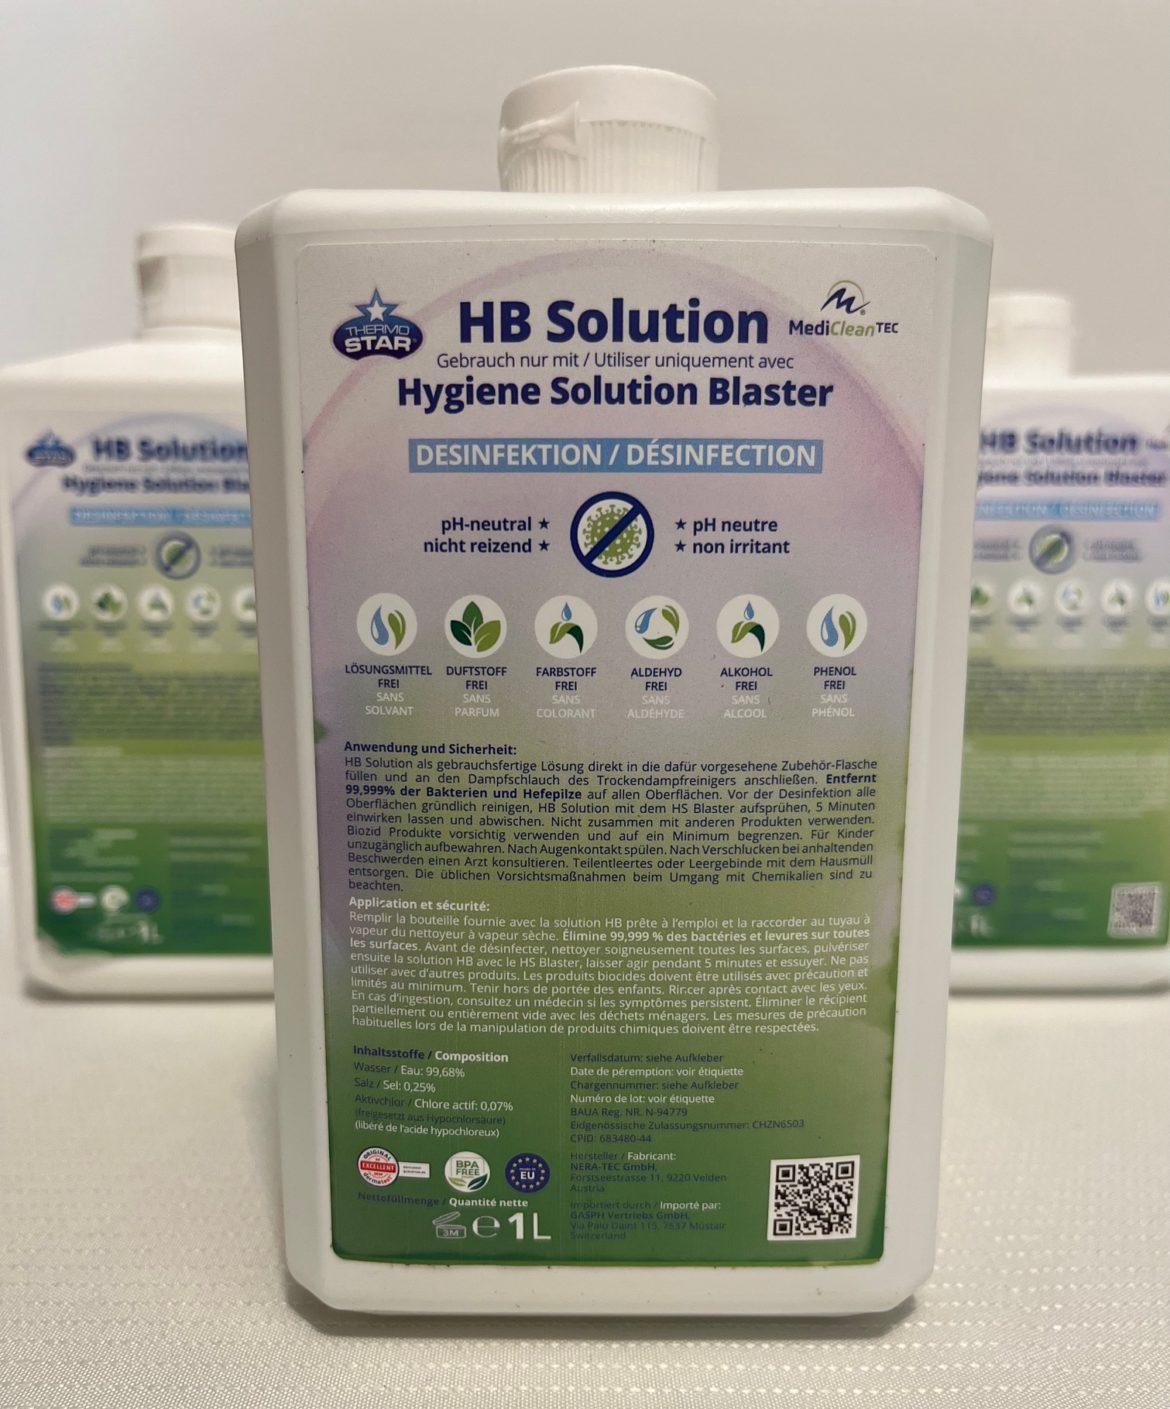 CONCLUSION ON THE RESULTS OF THE EVALUATION OF THE INNOVATIVE DISINFECTANT “HB SOLUTION”